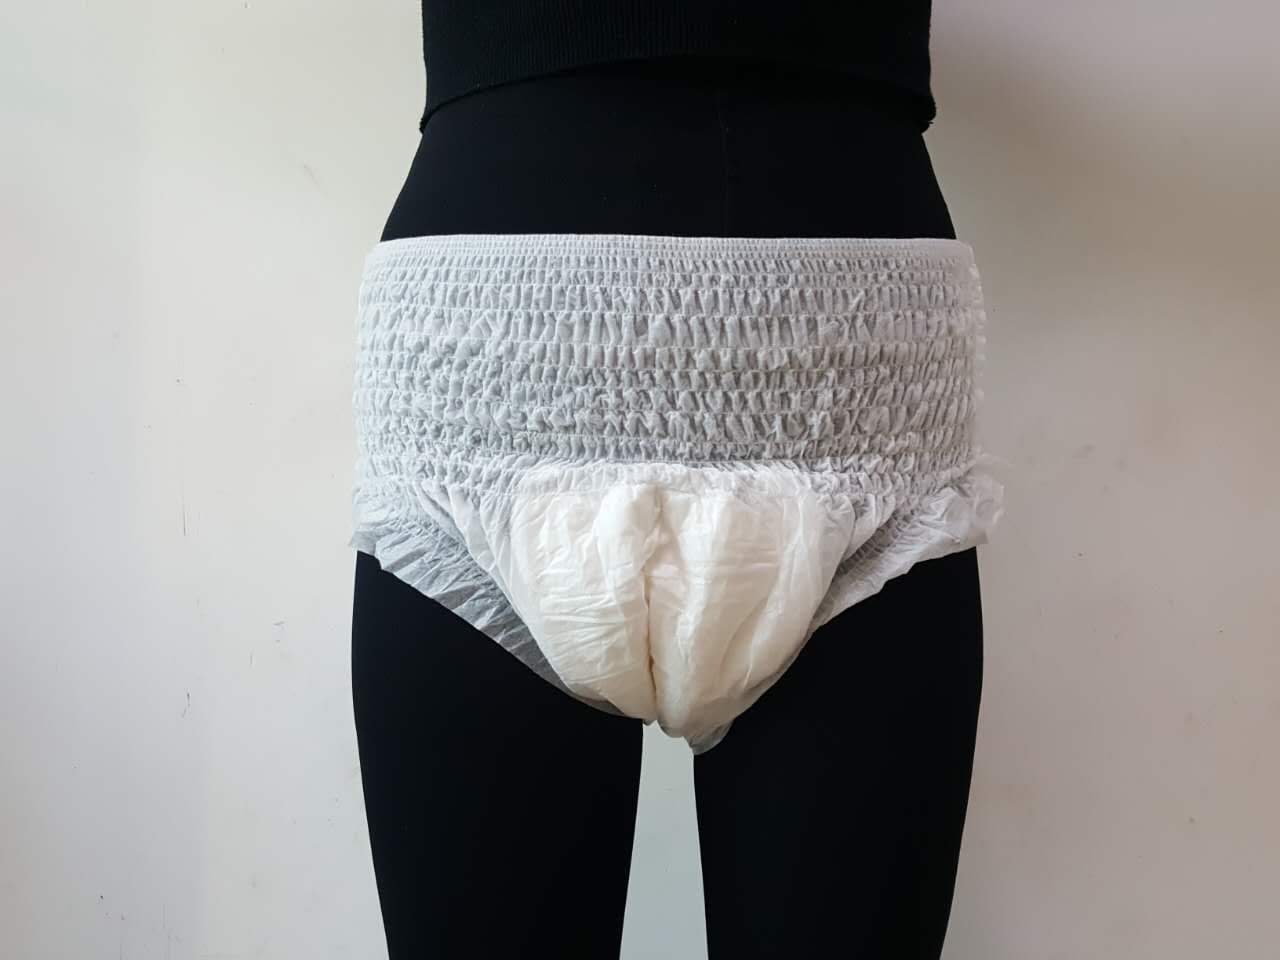 adult pull up diaper